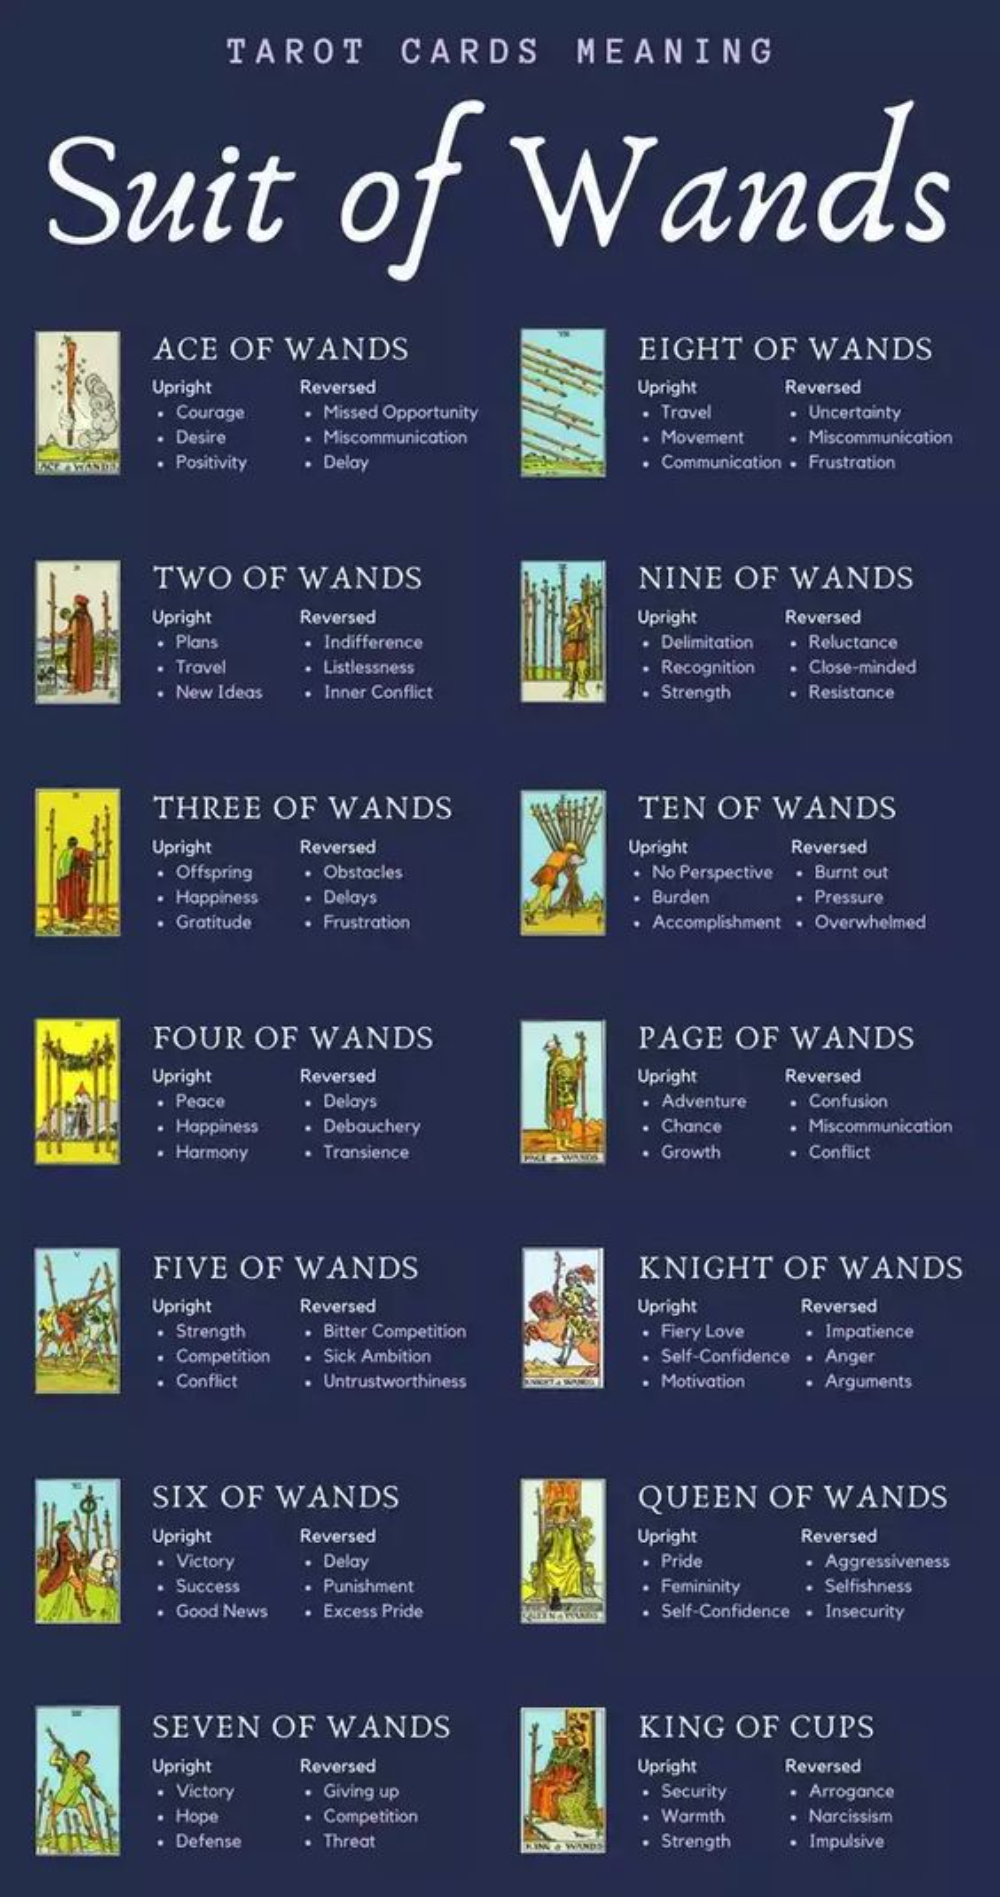 Suit of wands tarot card meanings | Apollo Tarot necklaces